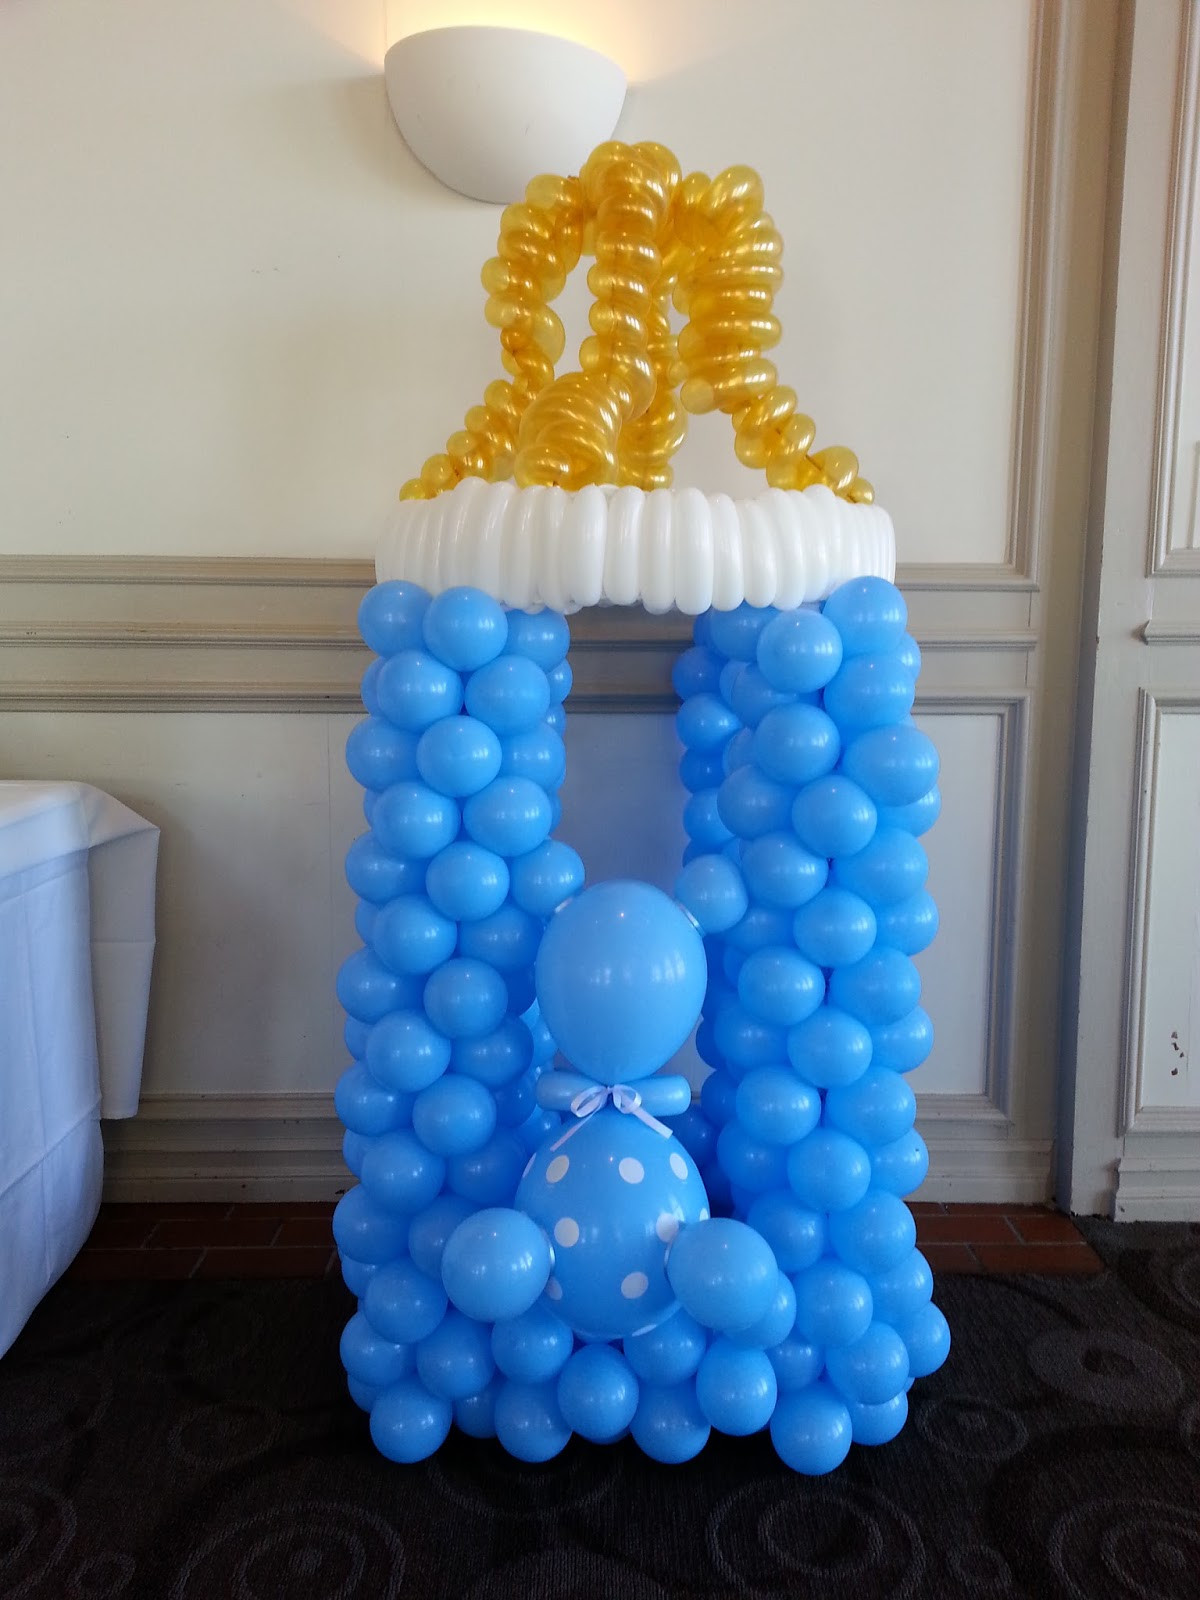 Balloon Decoration Baby Shower Ideas
 PoP Balloons A baby shower for a boy